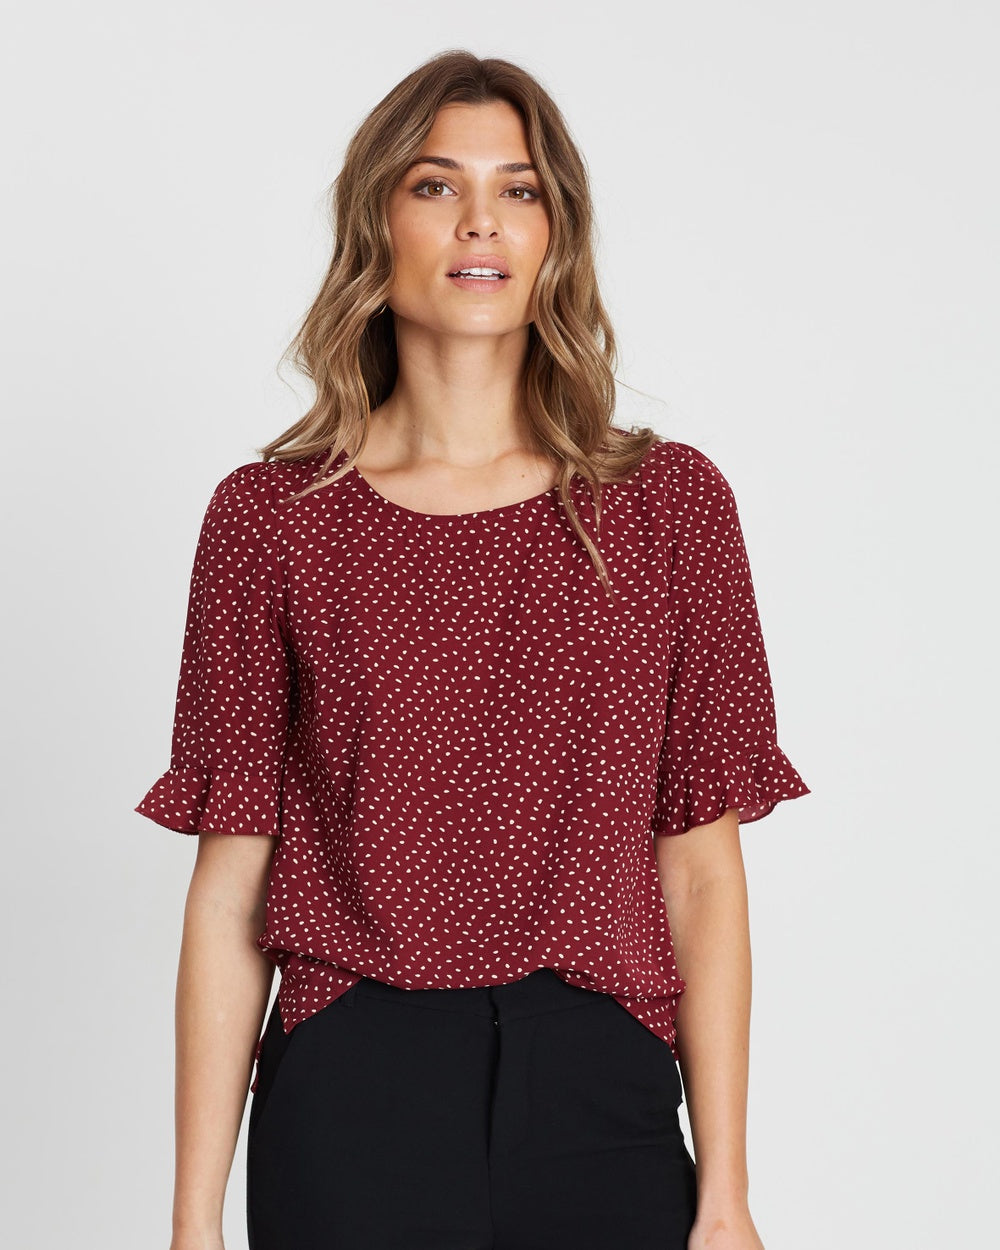 Beautiful blouse with burgandy and white spot - versatile with a jacket or on its own